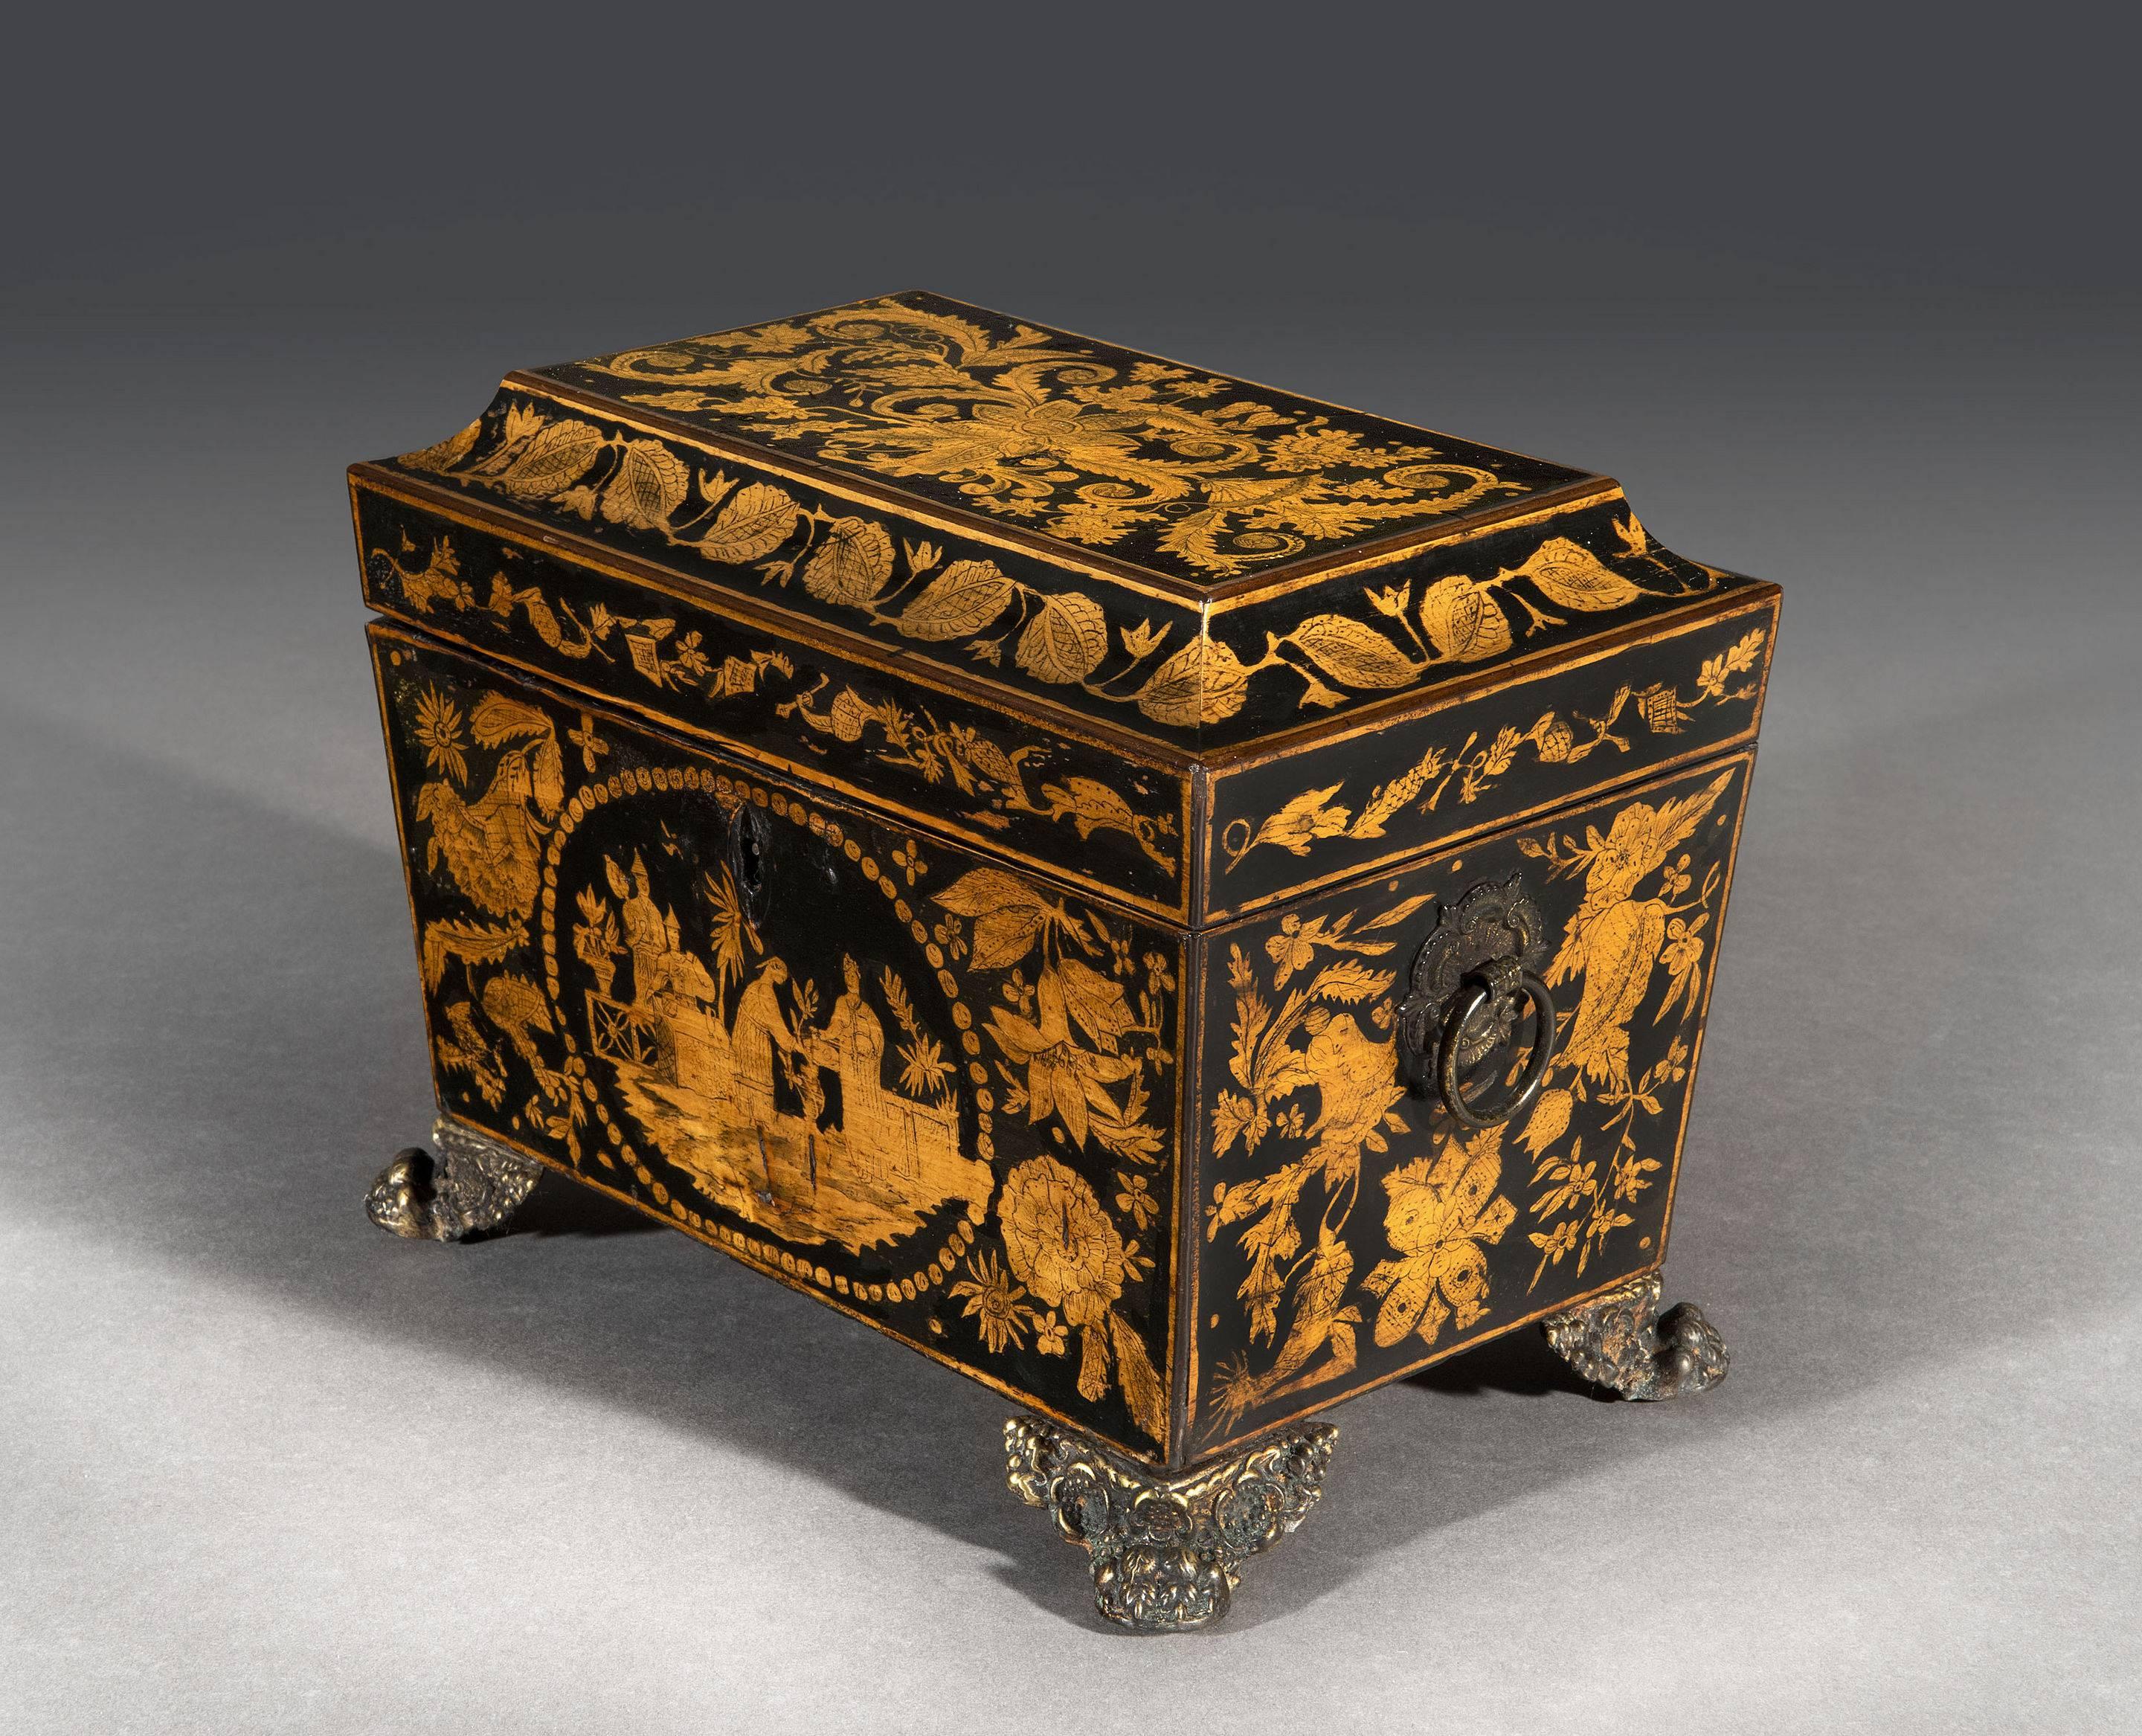 The tea chest has floral designs and on the front it has naive Chinese style figures drinking and serving tea.